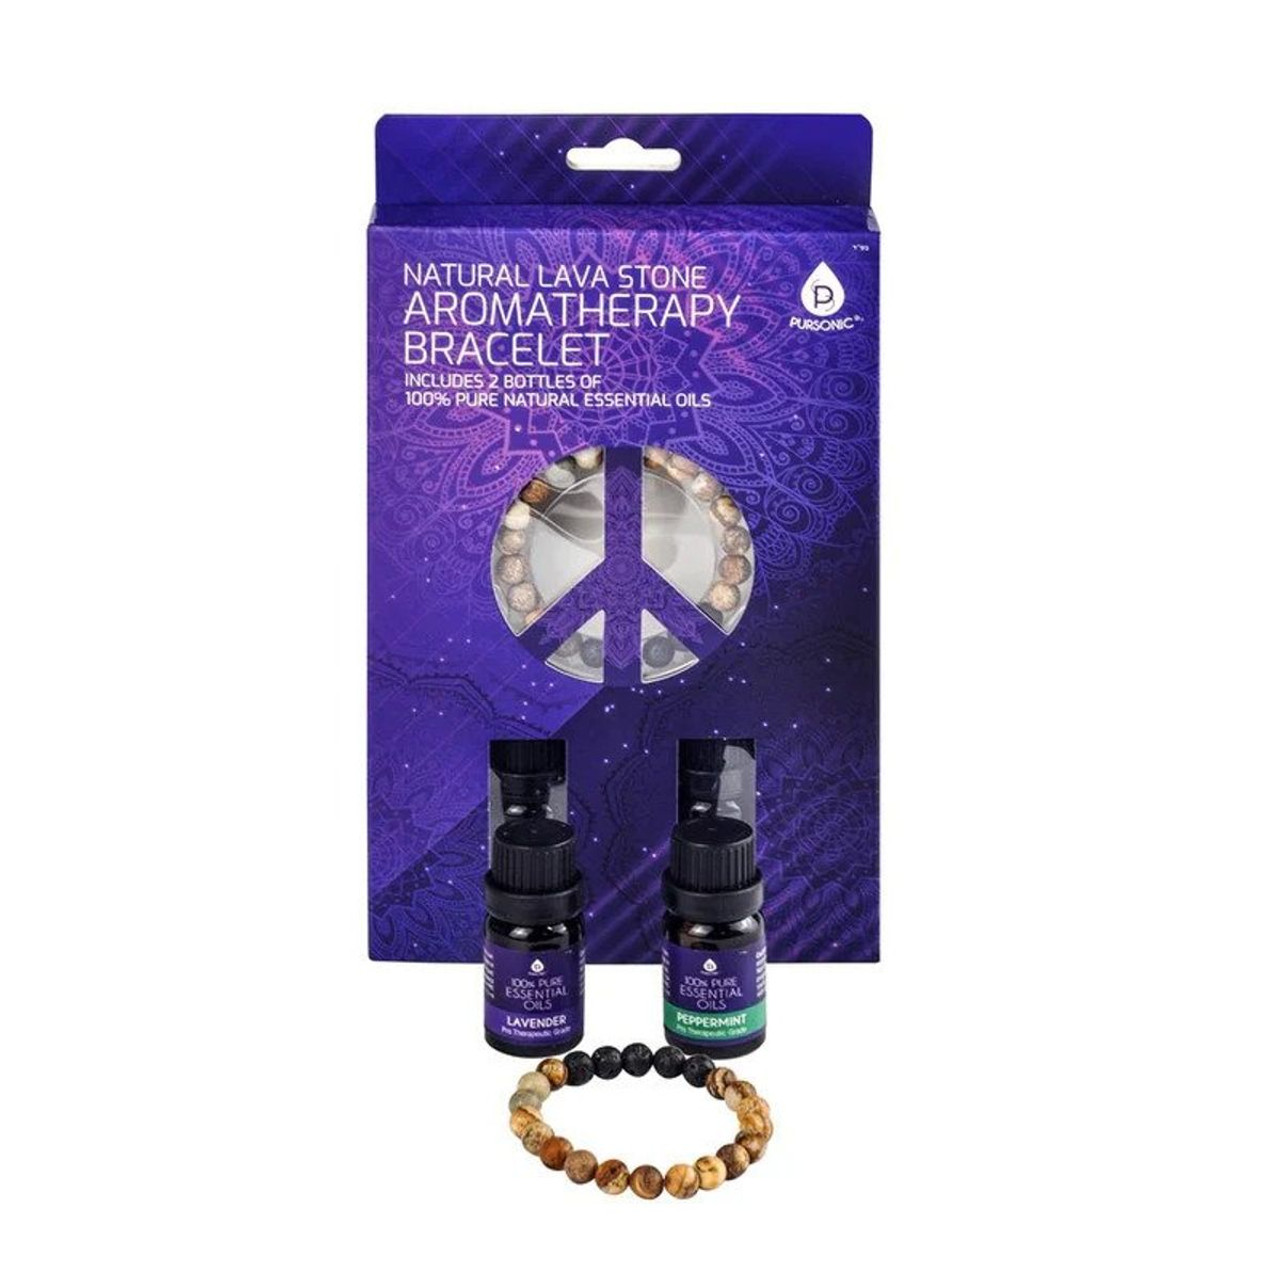 Pursonic® Lava Stone Aromatherapy Bracelets with Essential Oils product image